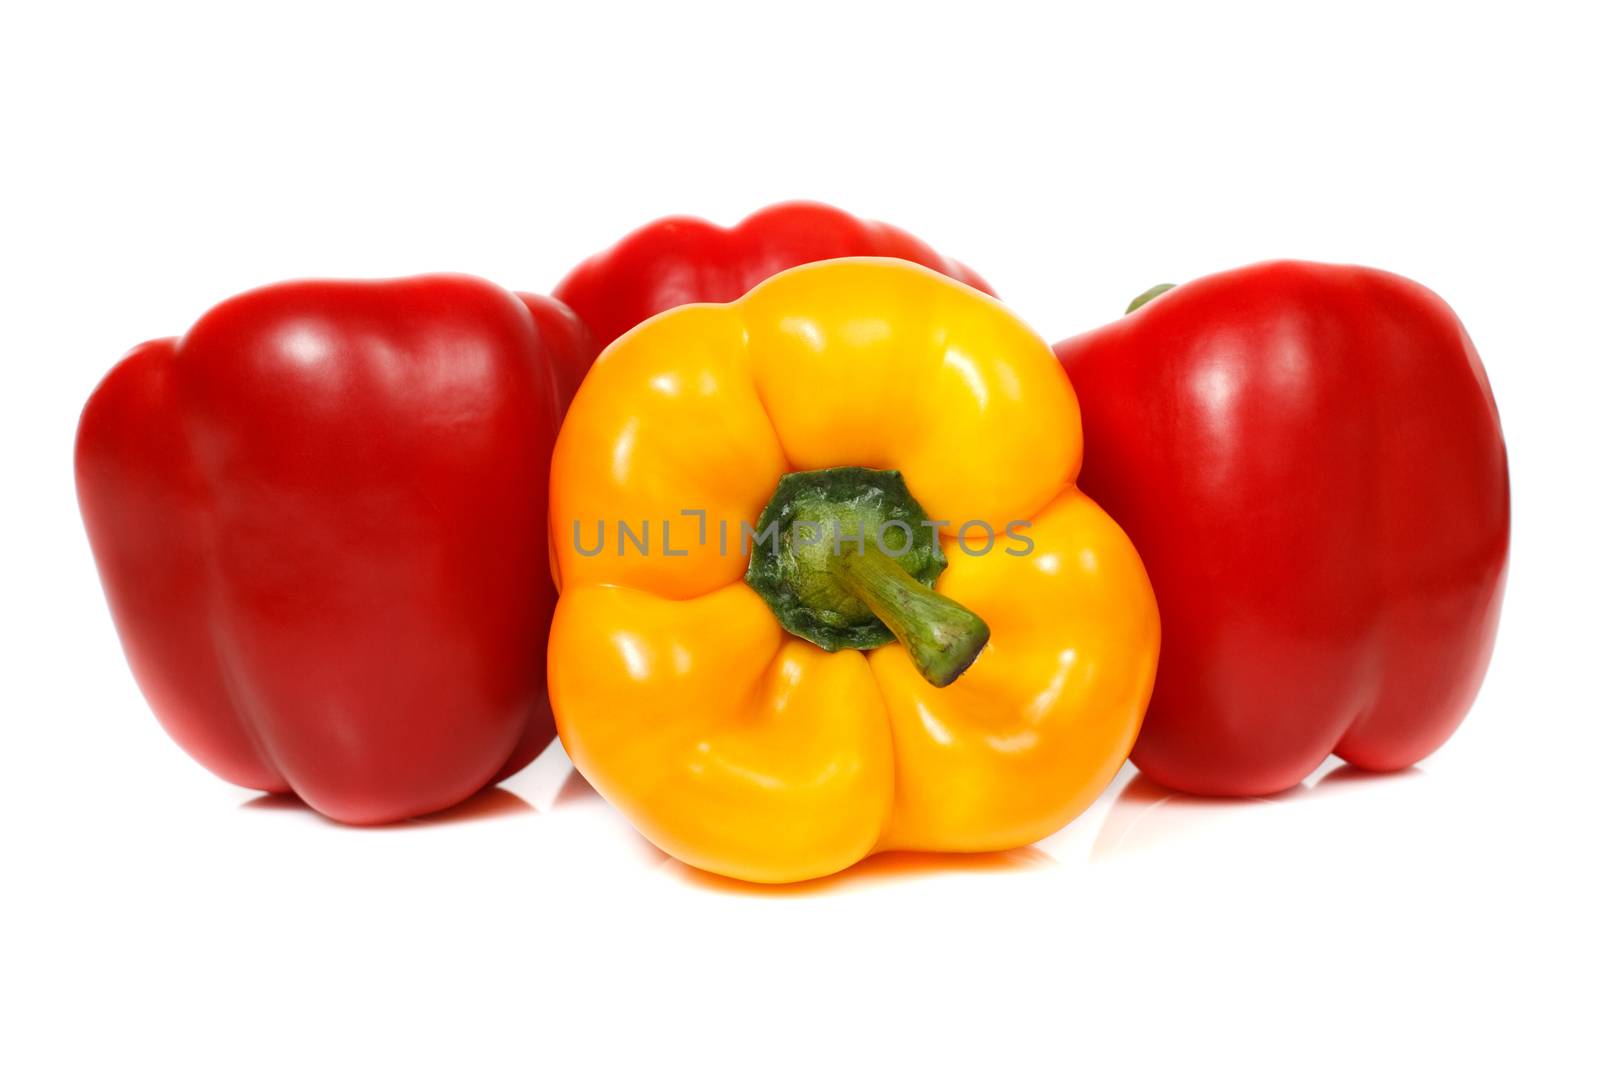 Red and yellow bell pepper composition by MilanMarkovic78